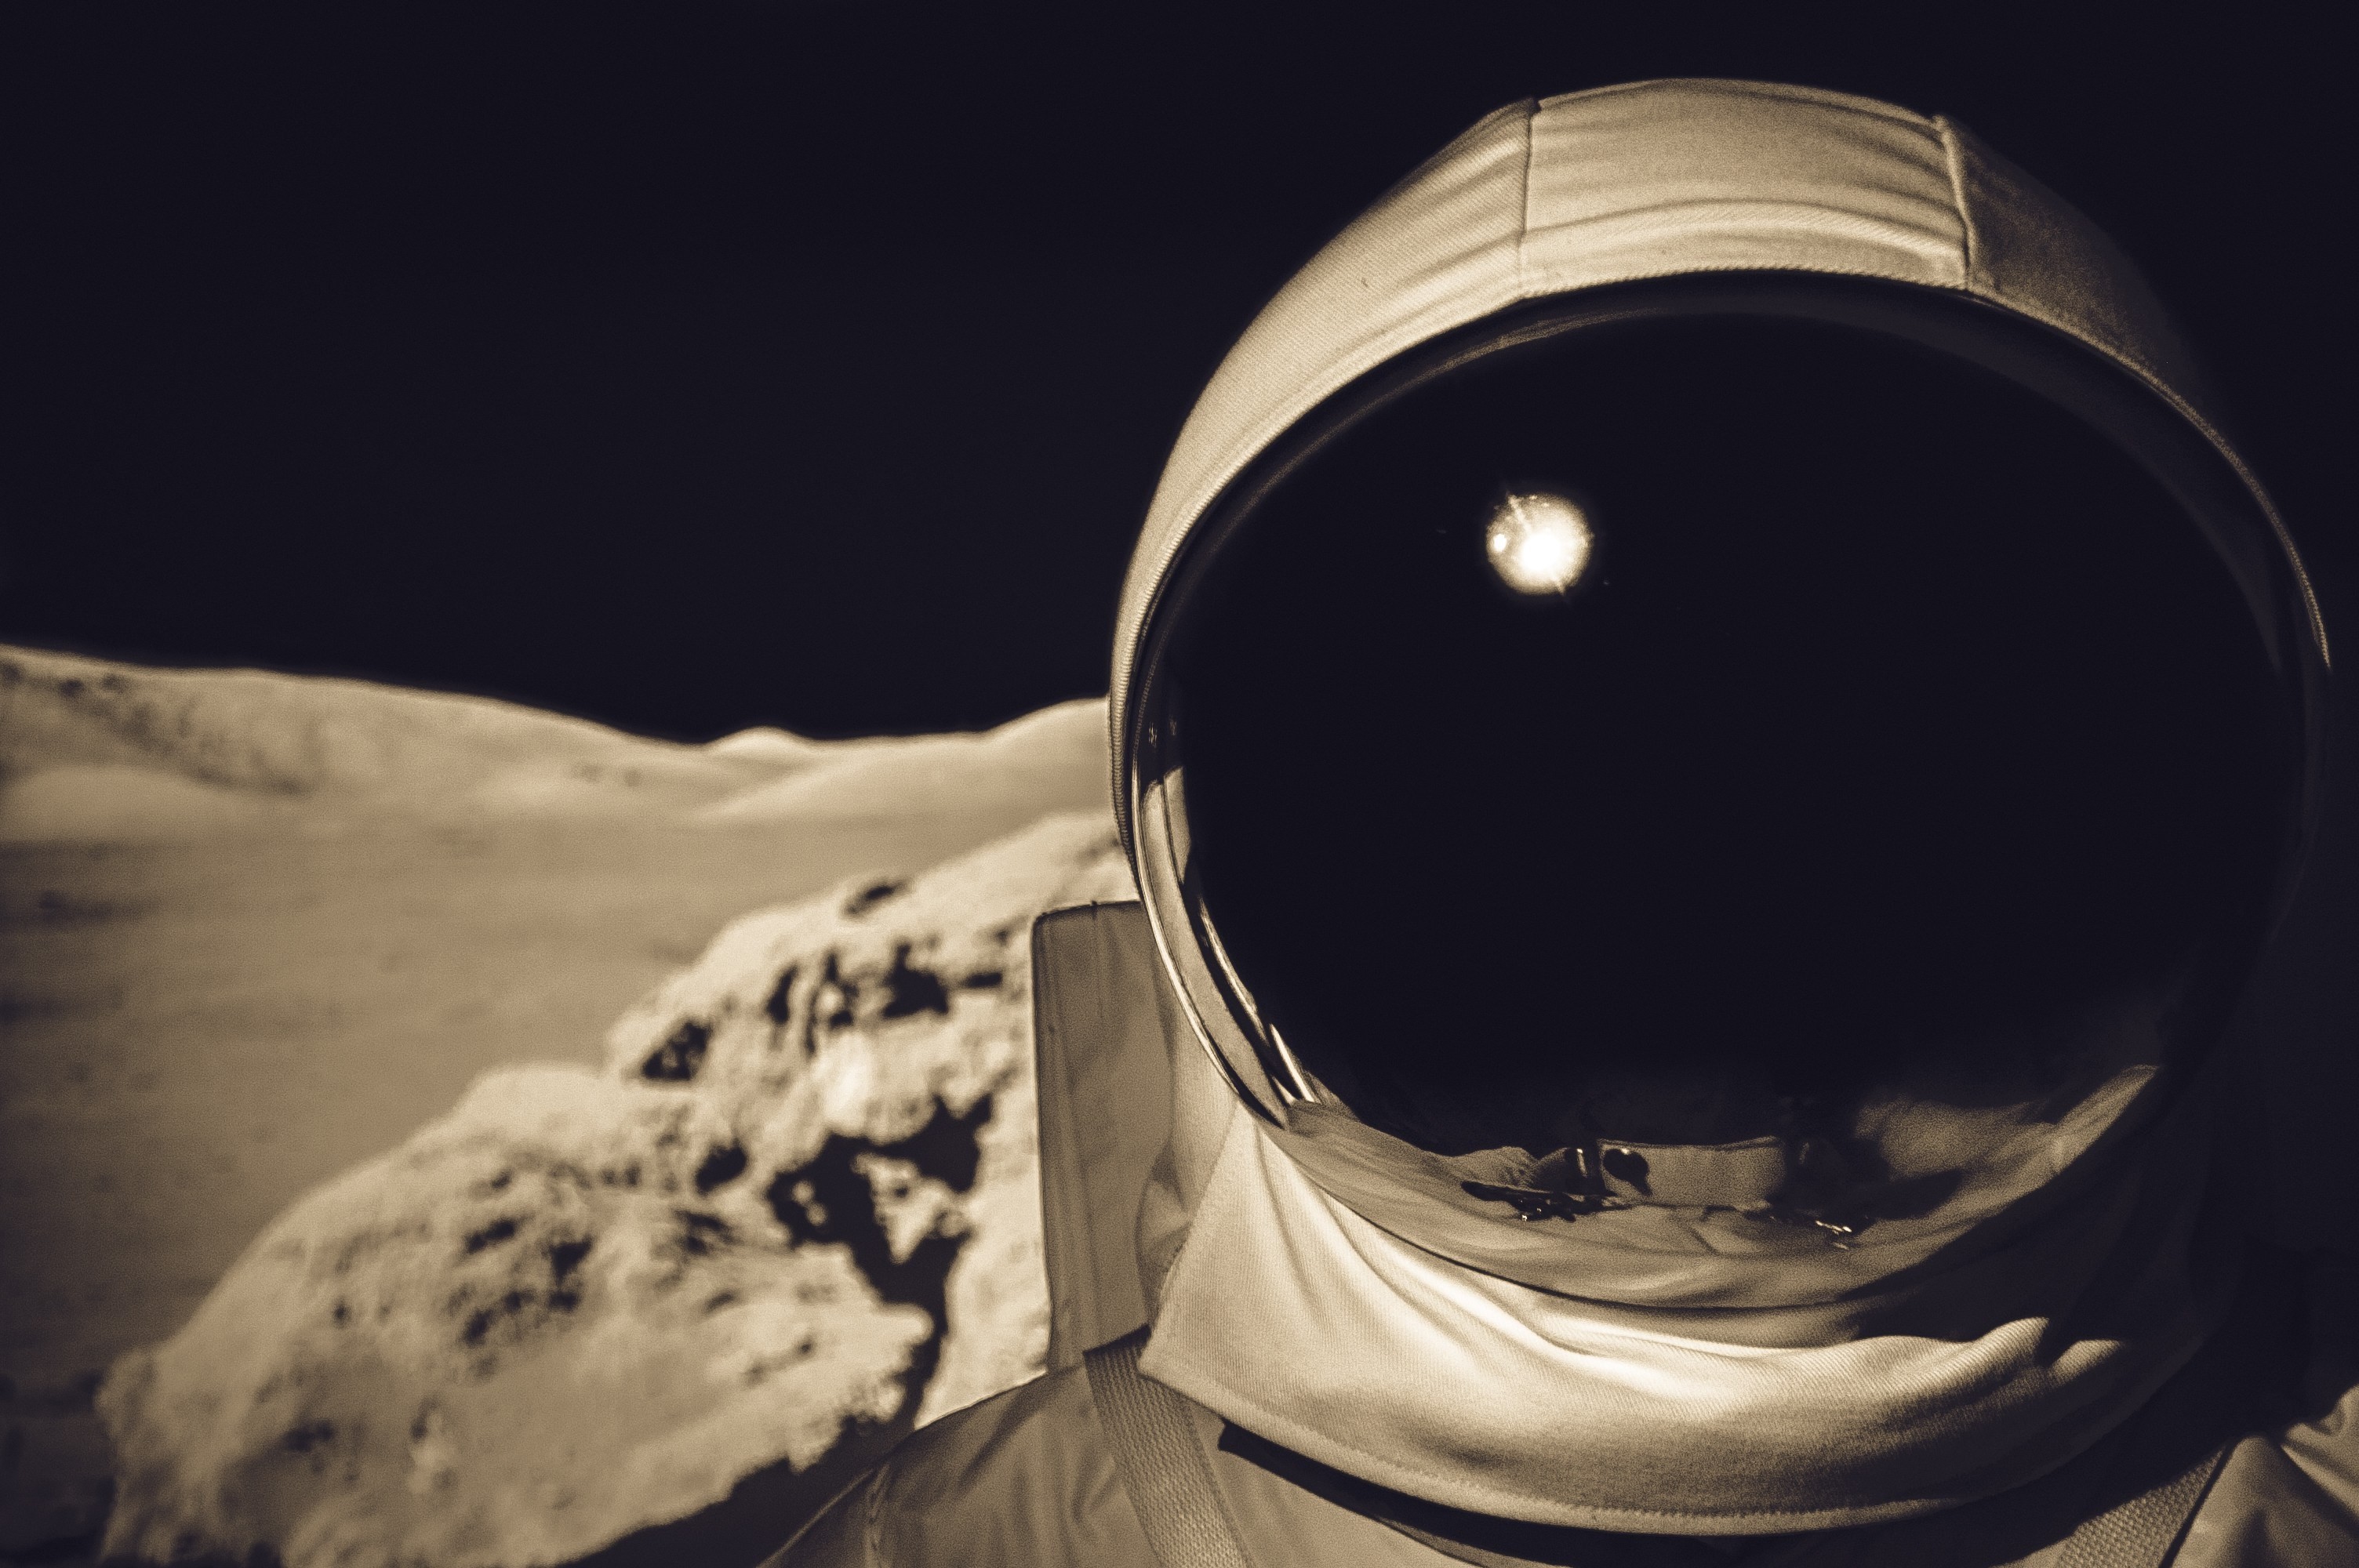 Astronaut on the Moon Wallpaper (65+ images)